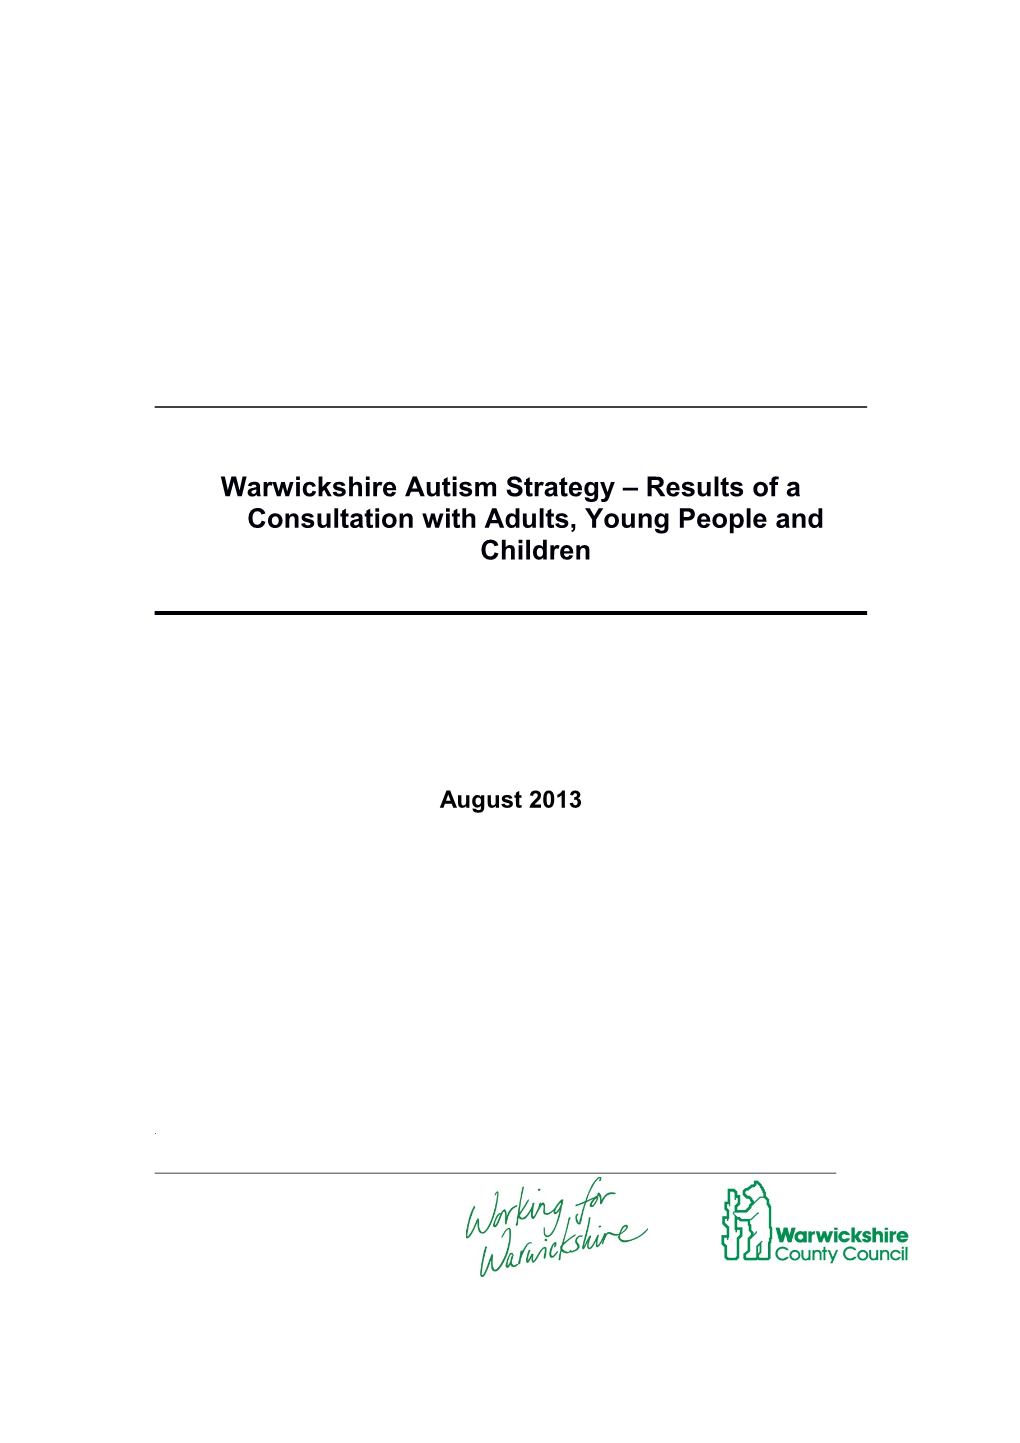 Warwickshire Autism Strategy Results of a Consultation with Adults, Young People and Children